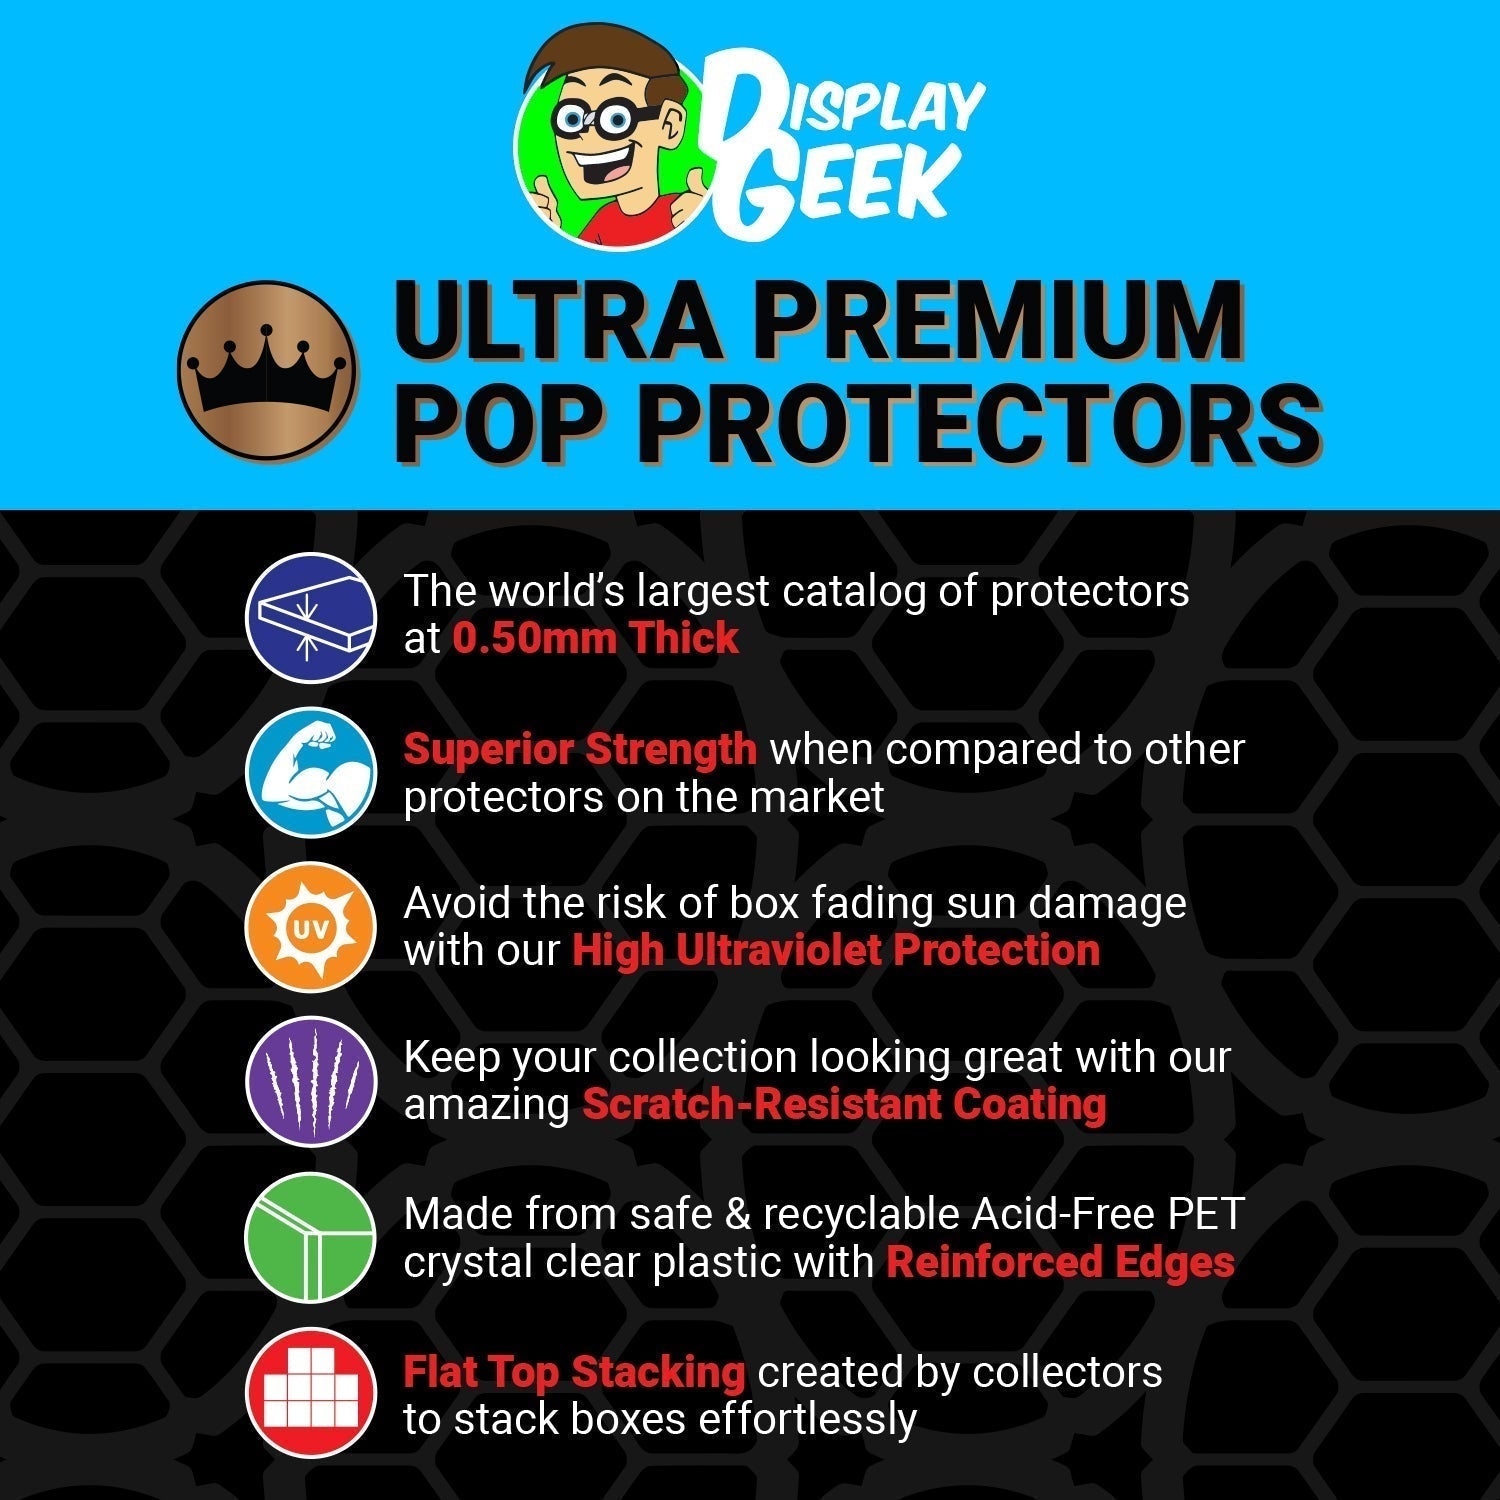 Pop Protector for 3 Pack Earl, Richard & Kam Legion of Boom Funko Pop - PPG Pop Protector Guide Search Created by Display Geek